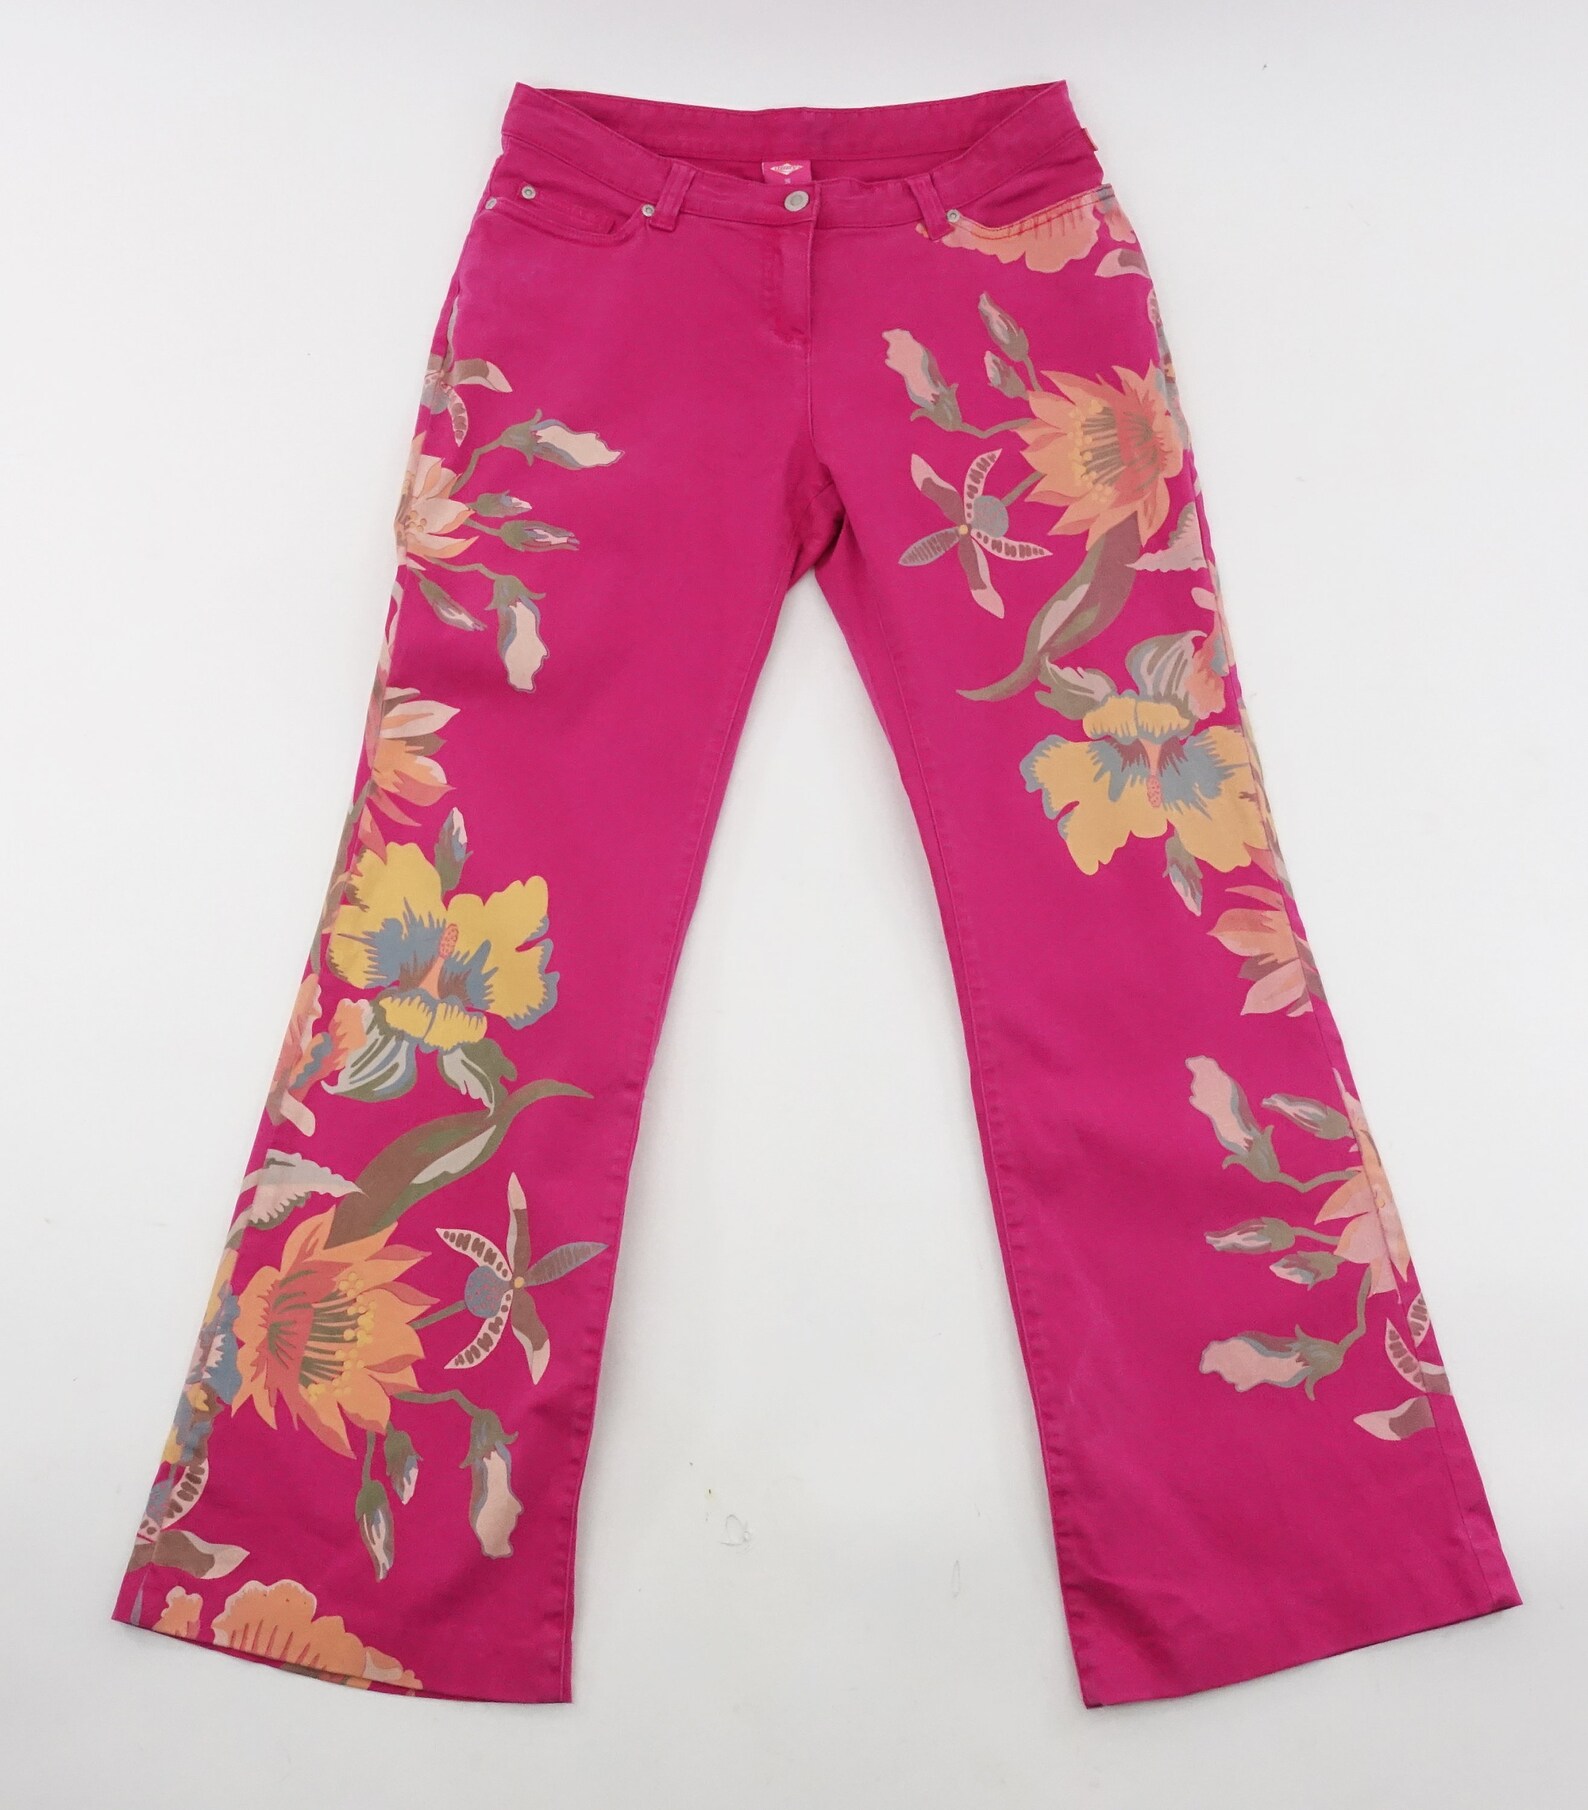 Vintage Oilily Pants Pink Floral Trousers Womens Size 36 - Etsy